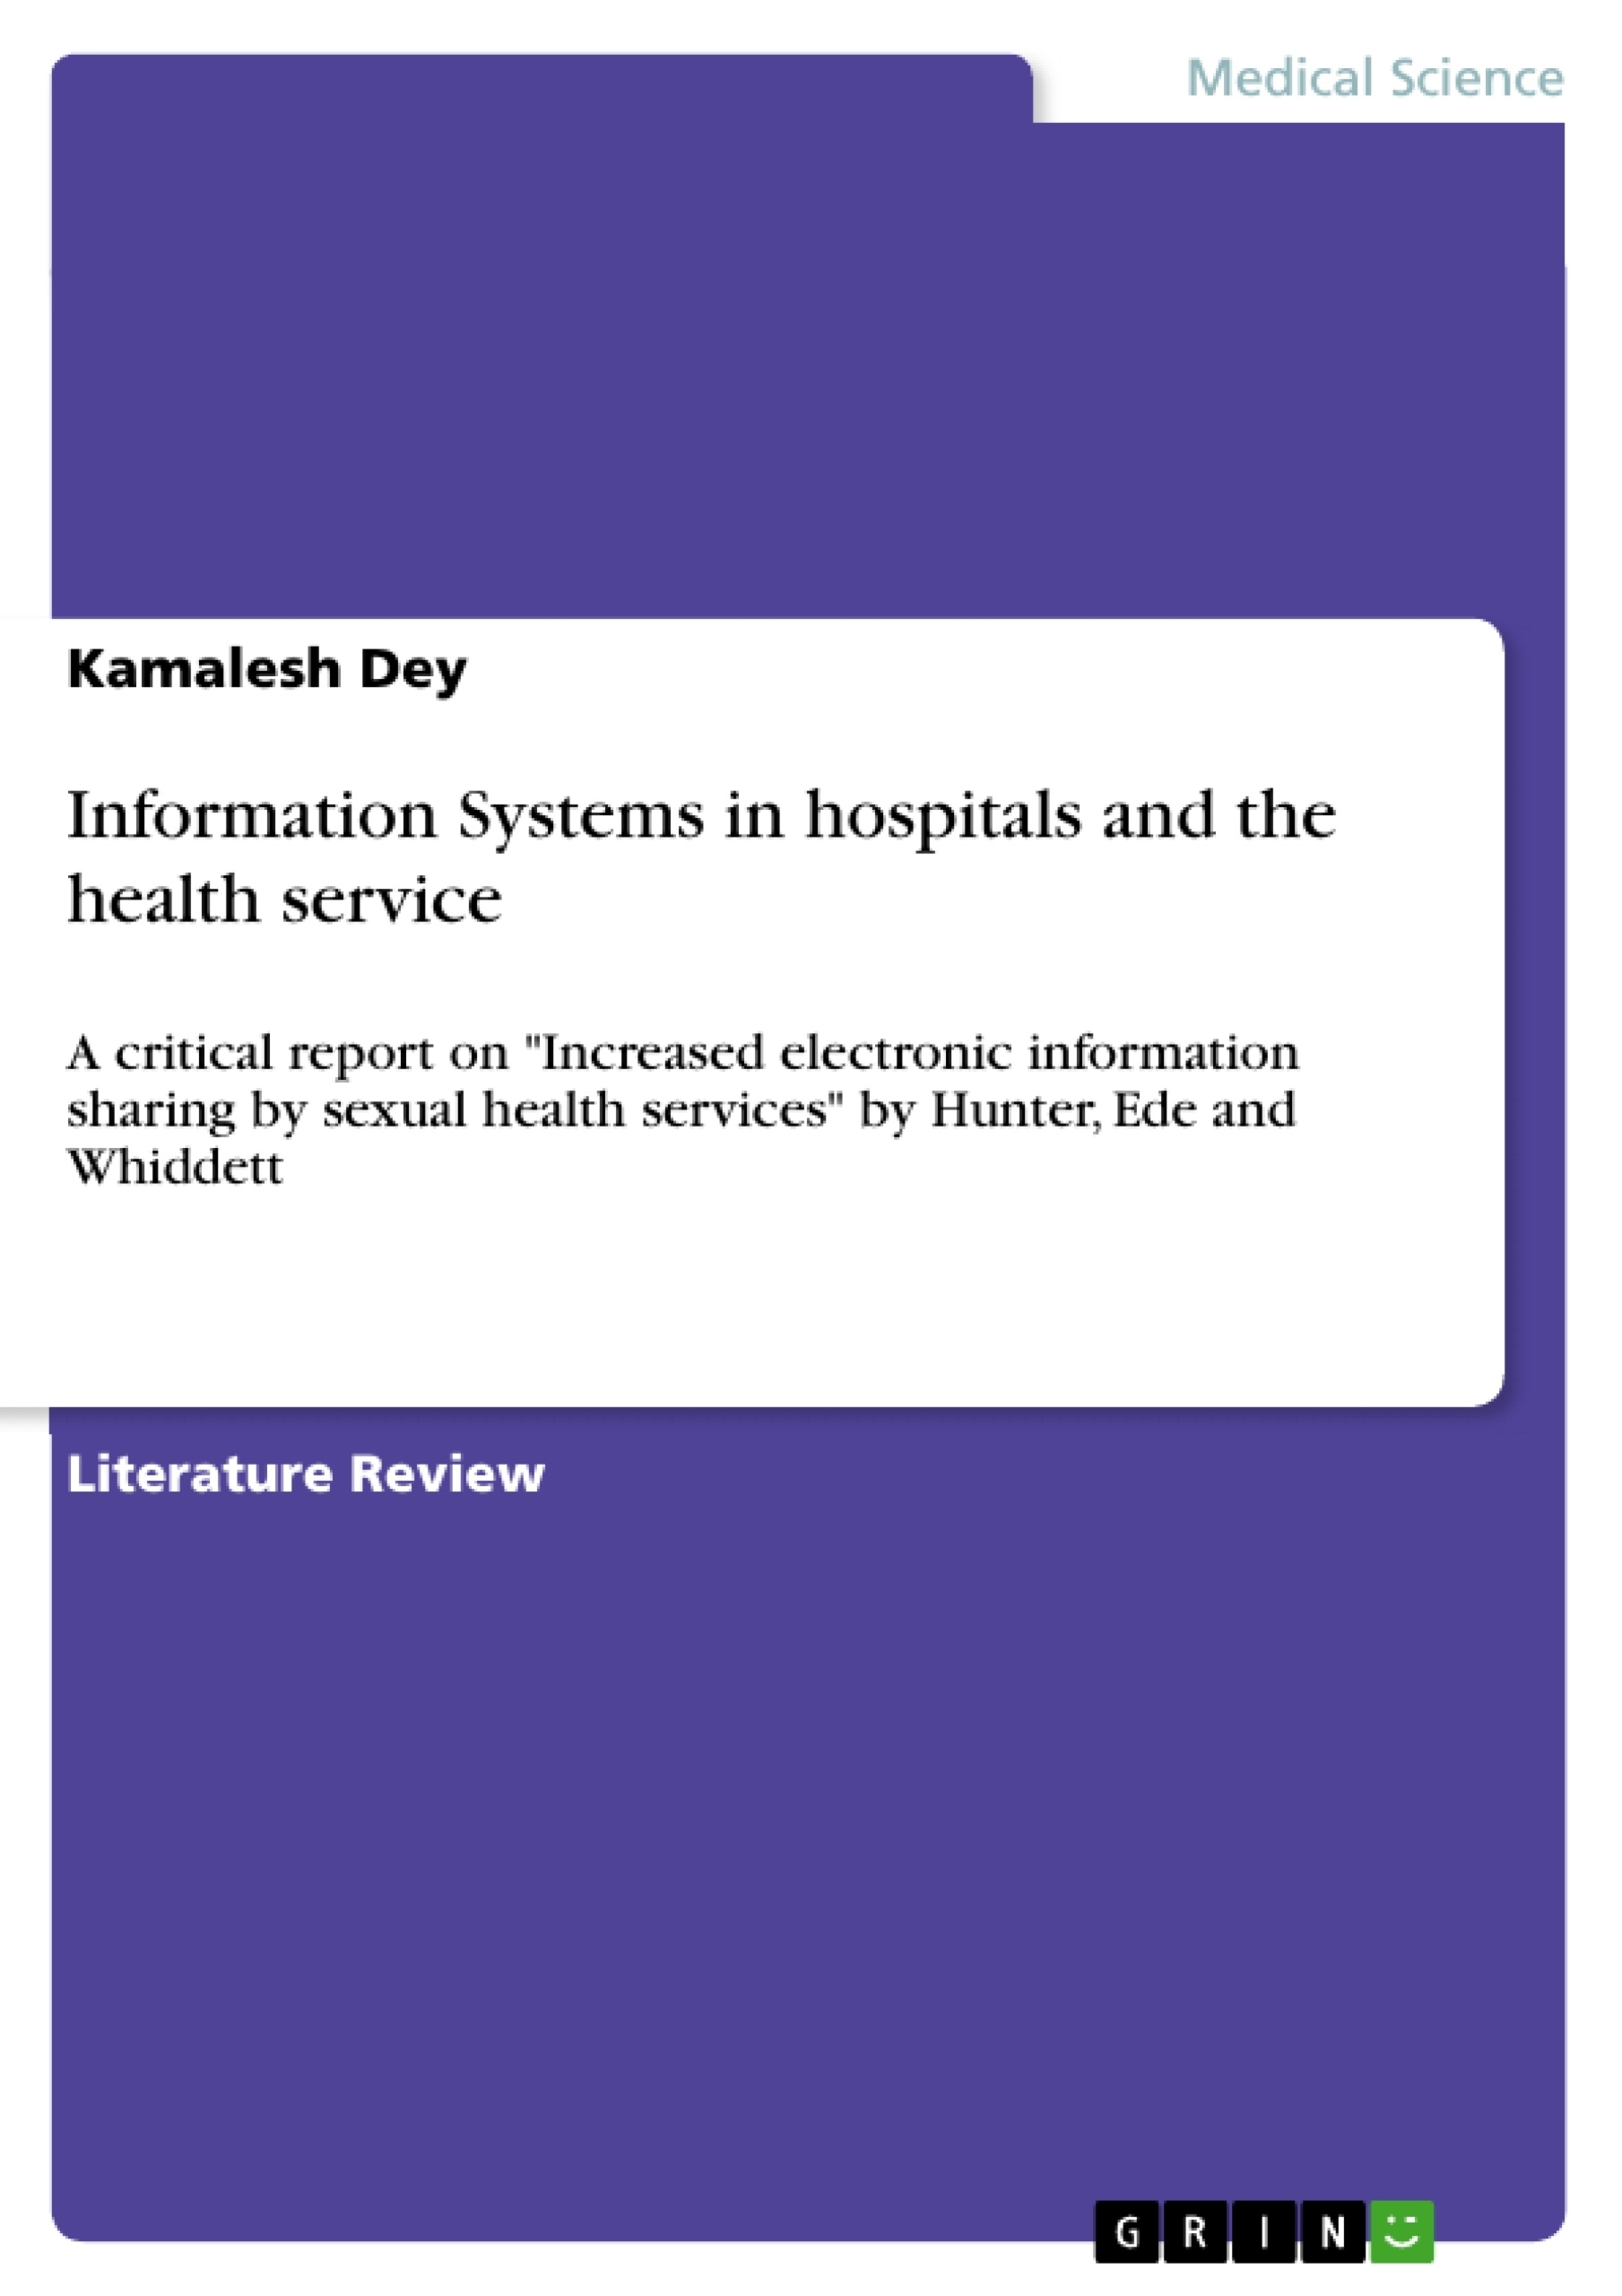 Titel: Information Systems in hospitals and the health service